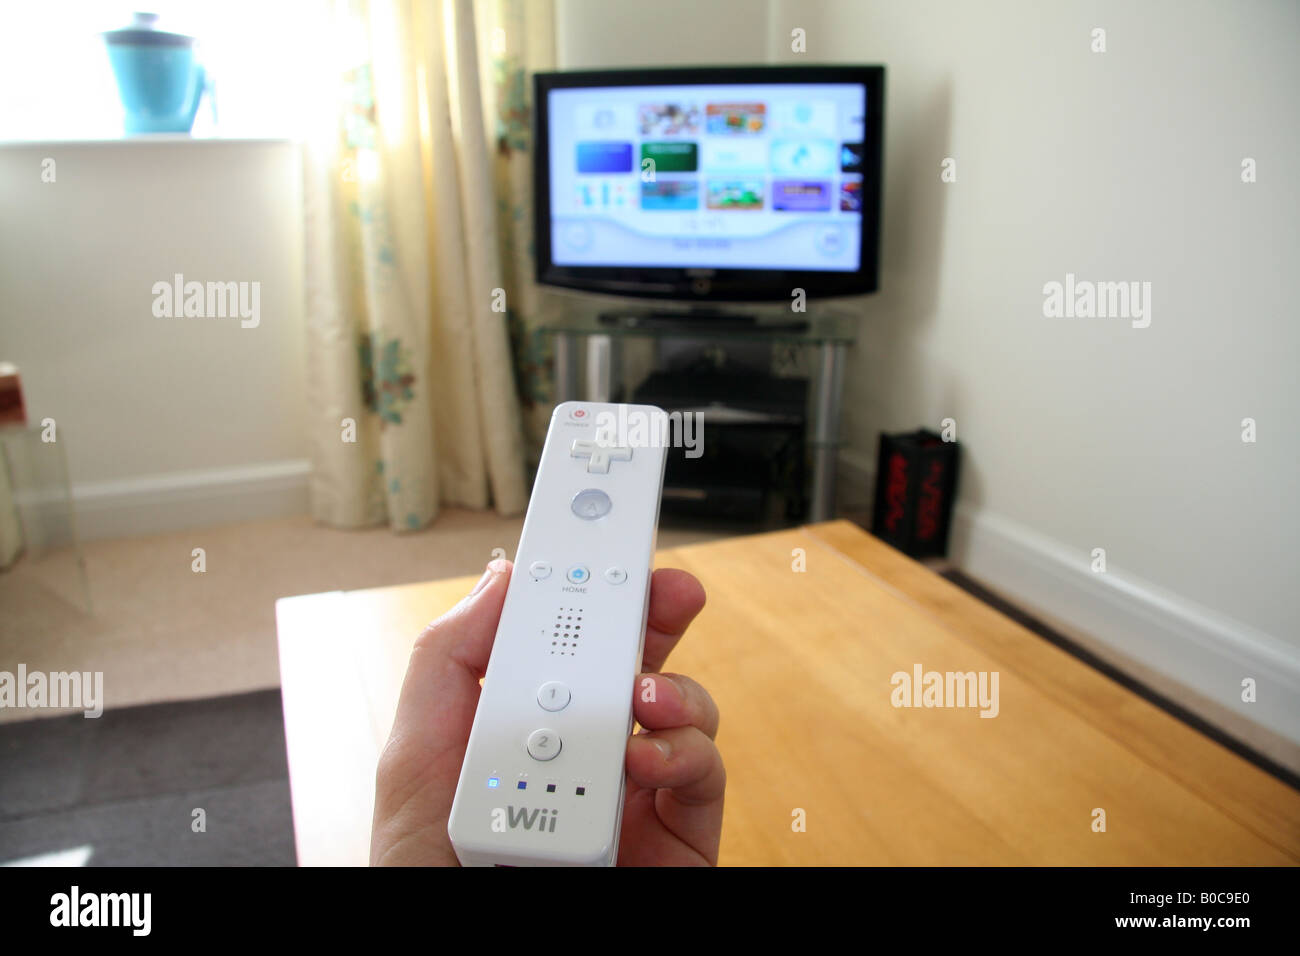 Hand Holding Nintendo wii controller pointing at the TV Stock Photo